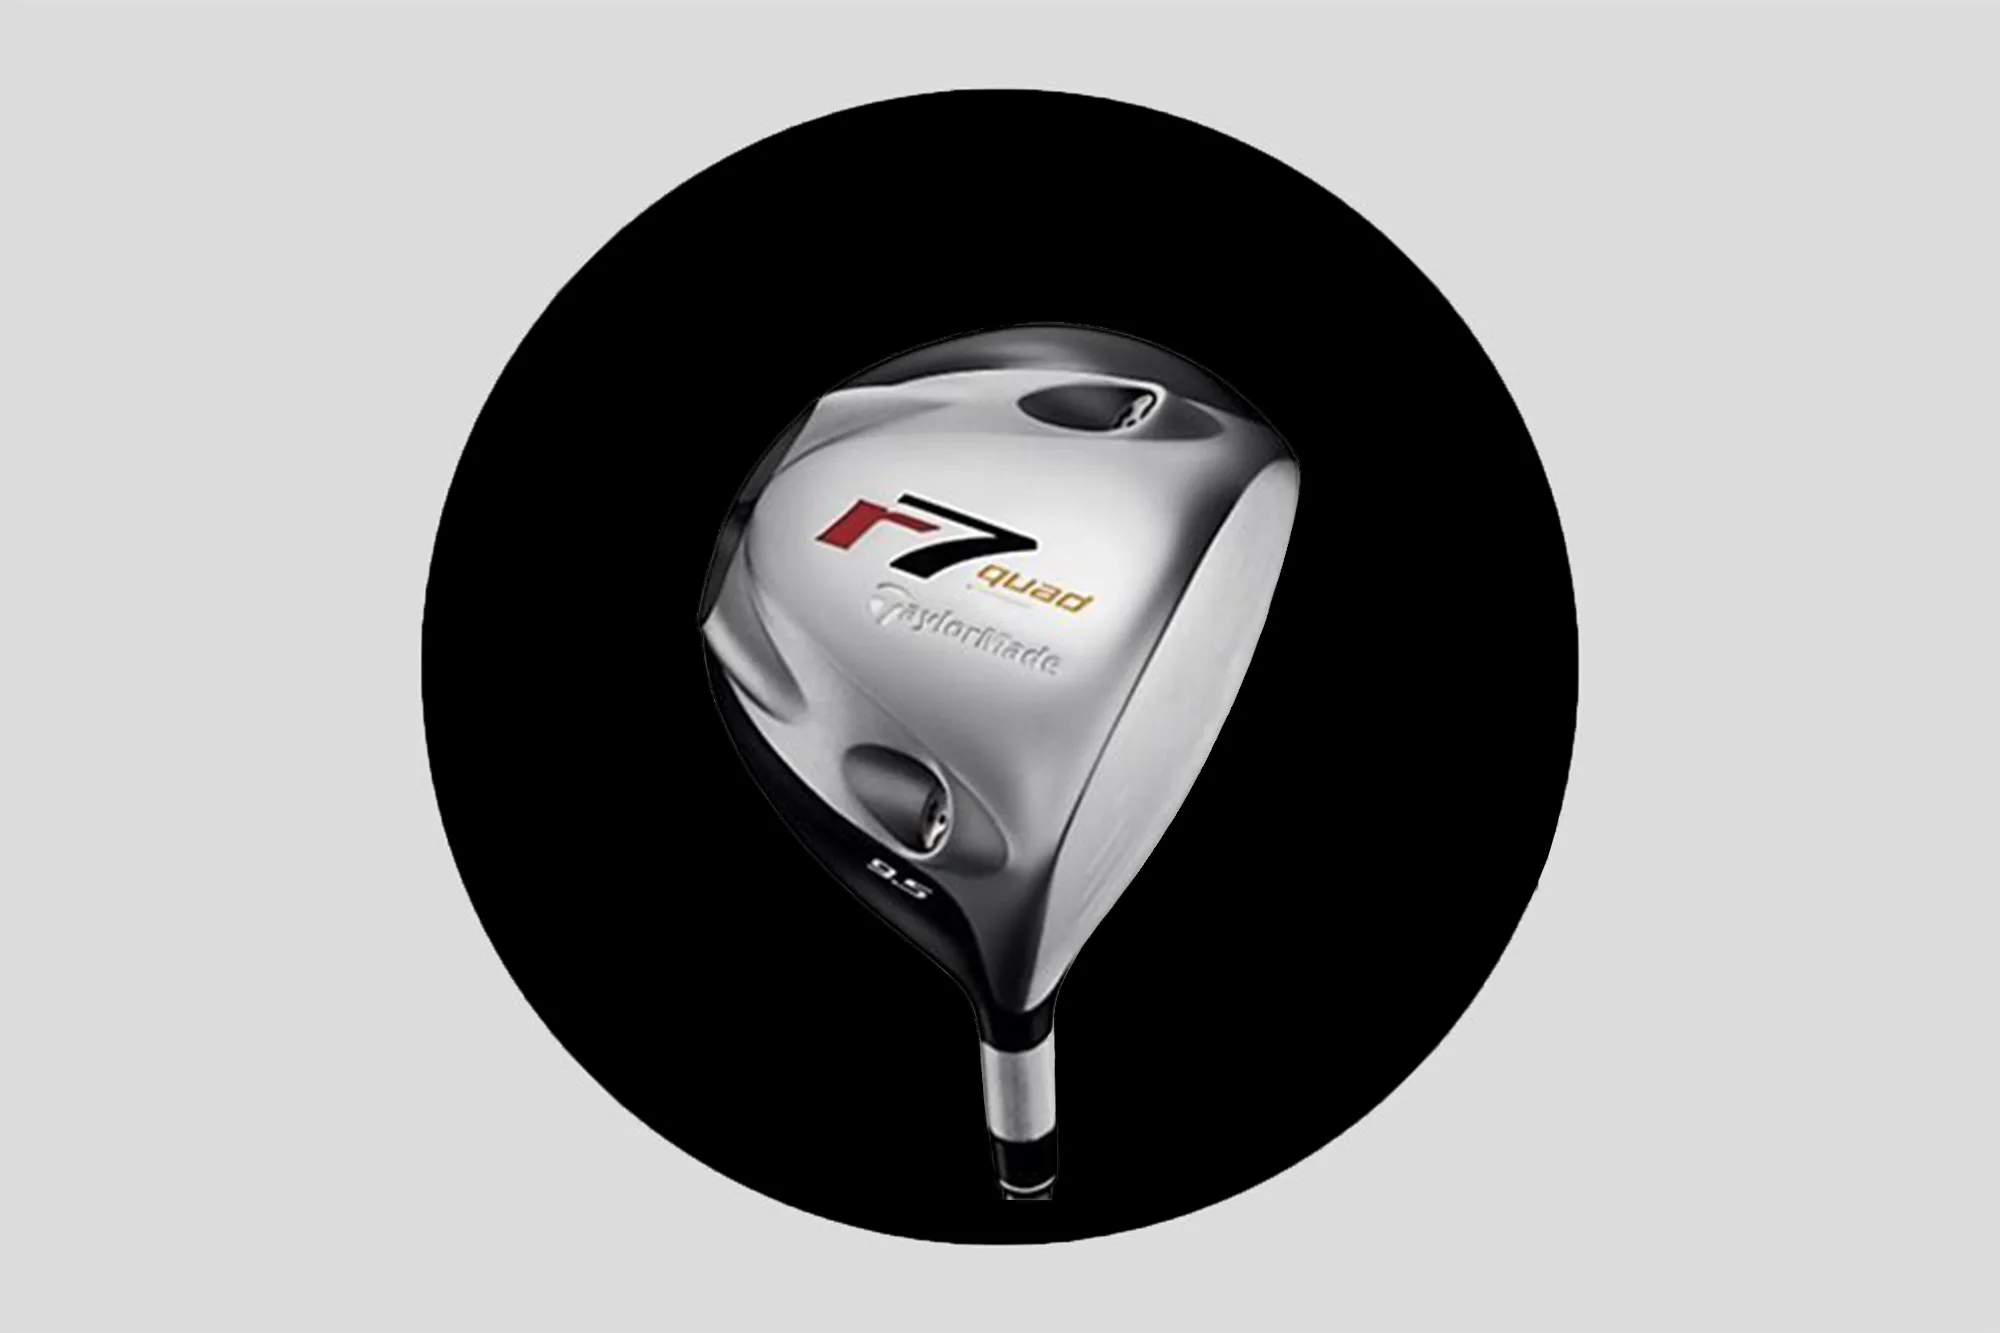 TaylorMade drivers by year: 40 years of game-changing technology